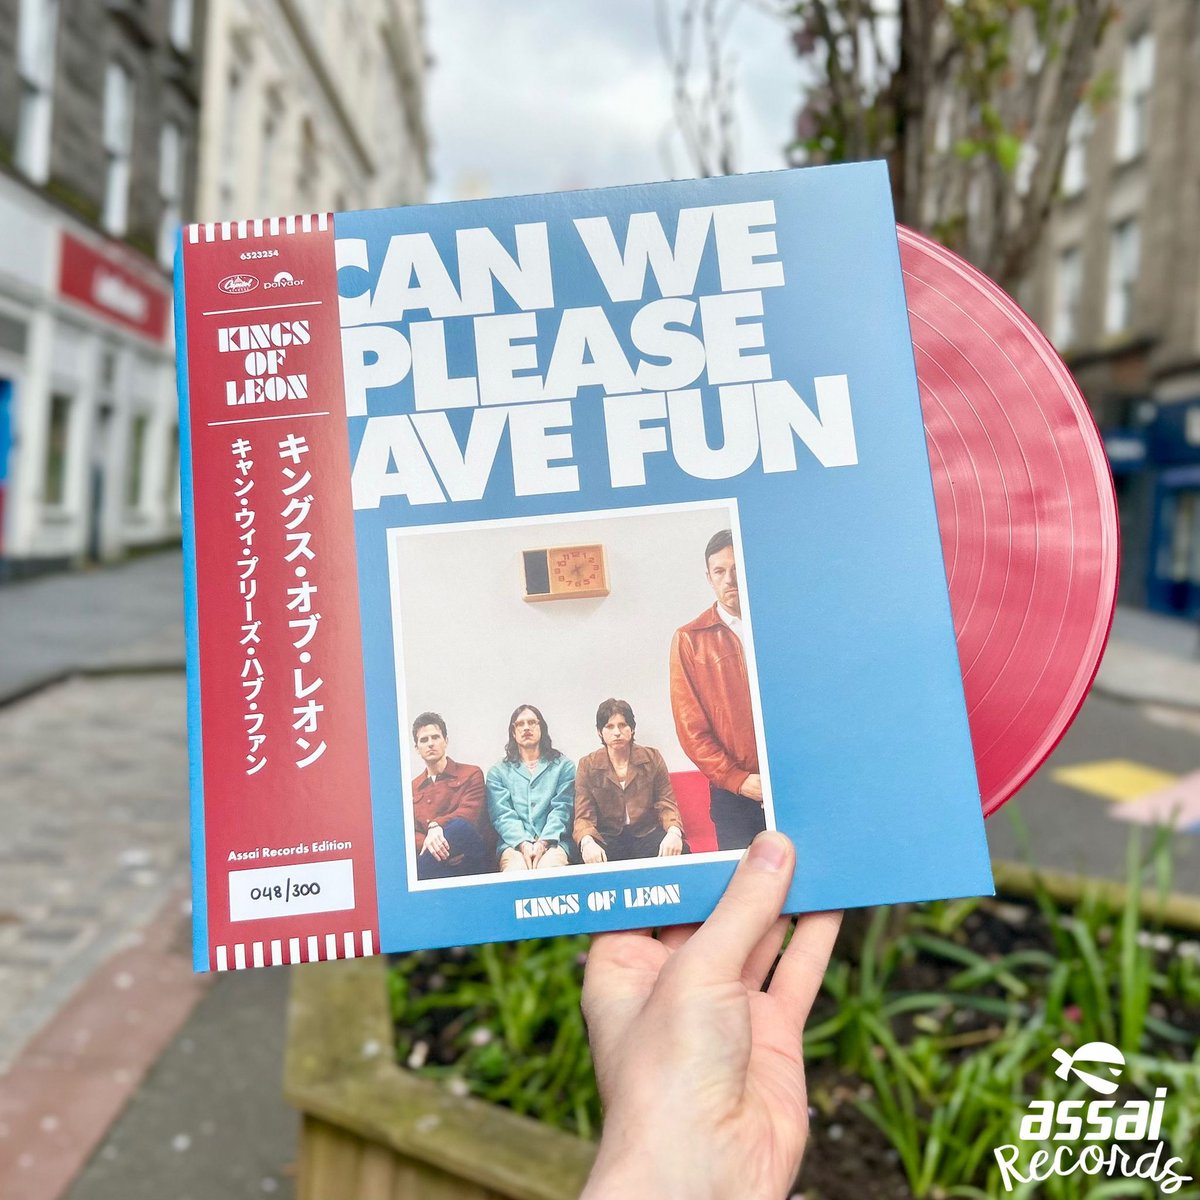 * KINGS OF LEON OBI EDITION! * Very excited for this new release! @KingsOfLeon are back tomorrow with #CanWePleaseHaveFun The singles have been incredible! Our Obi Edition is limited to 300 copies, hand numbered and on red vinyl! Pre-Order: tinyurl.com/CanWeAssai #KOL